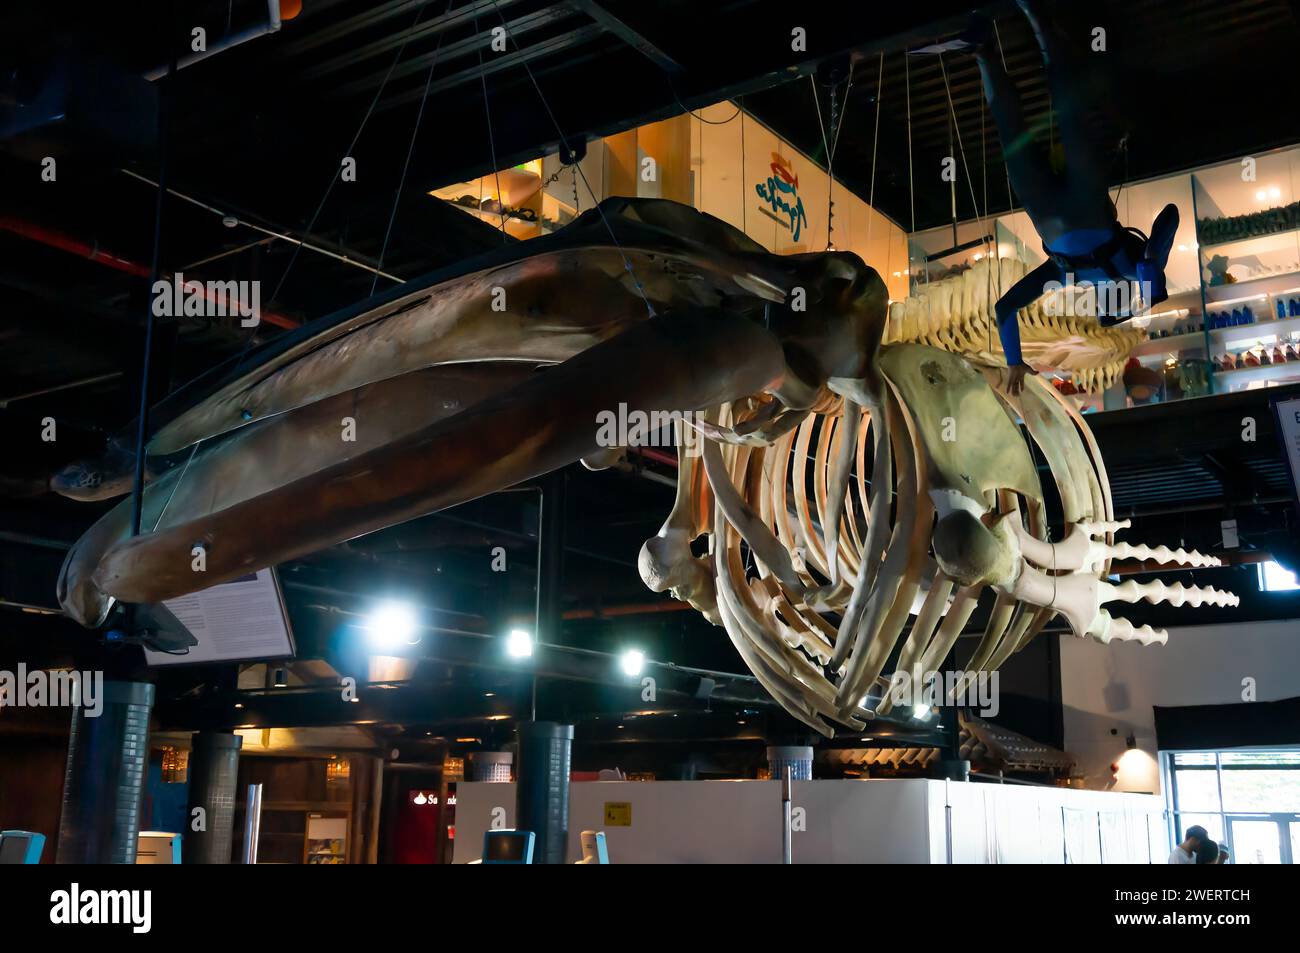 A Humpback whale (Megaptera novaeangliae) skeleton hanging over and displayed in the main entrance hall of AquaRio aquarium in Gamboa district. Stock Photo